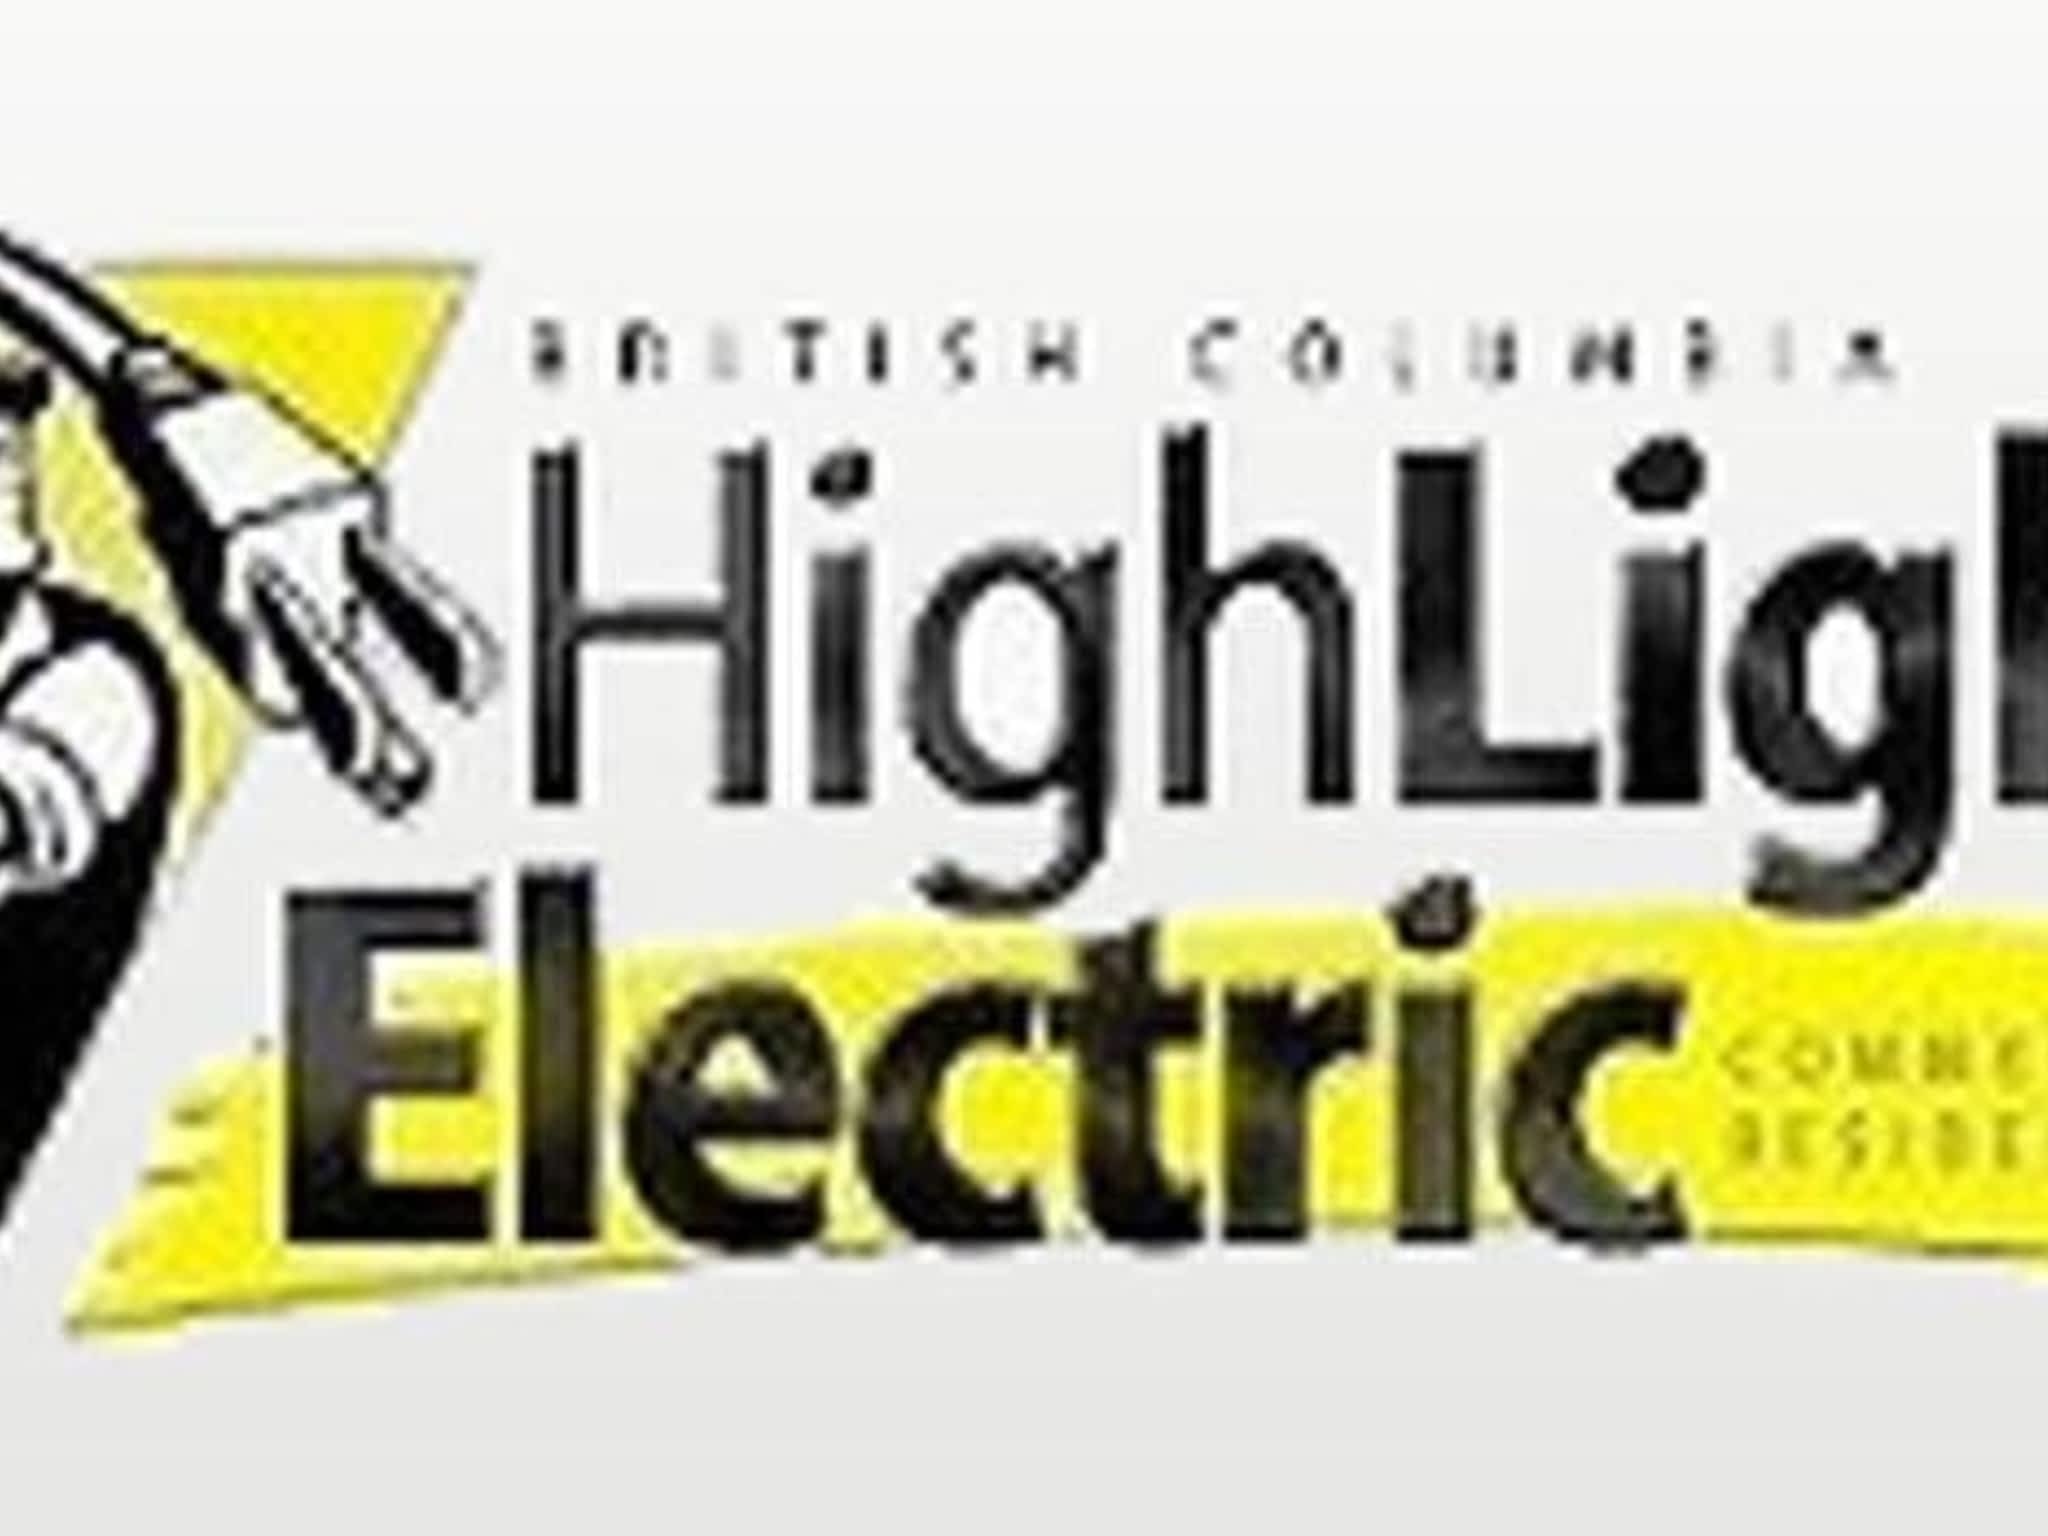 photo Bc Highlight Electric Corp